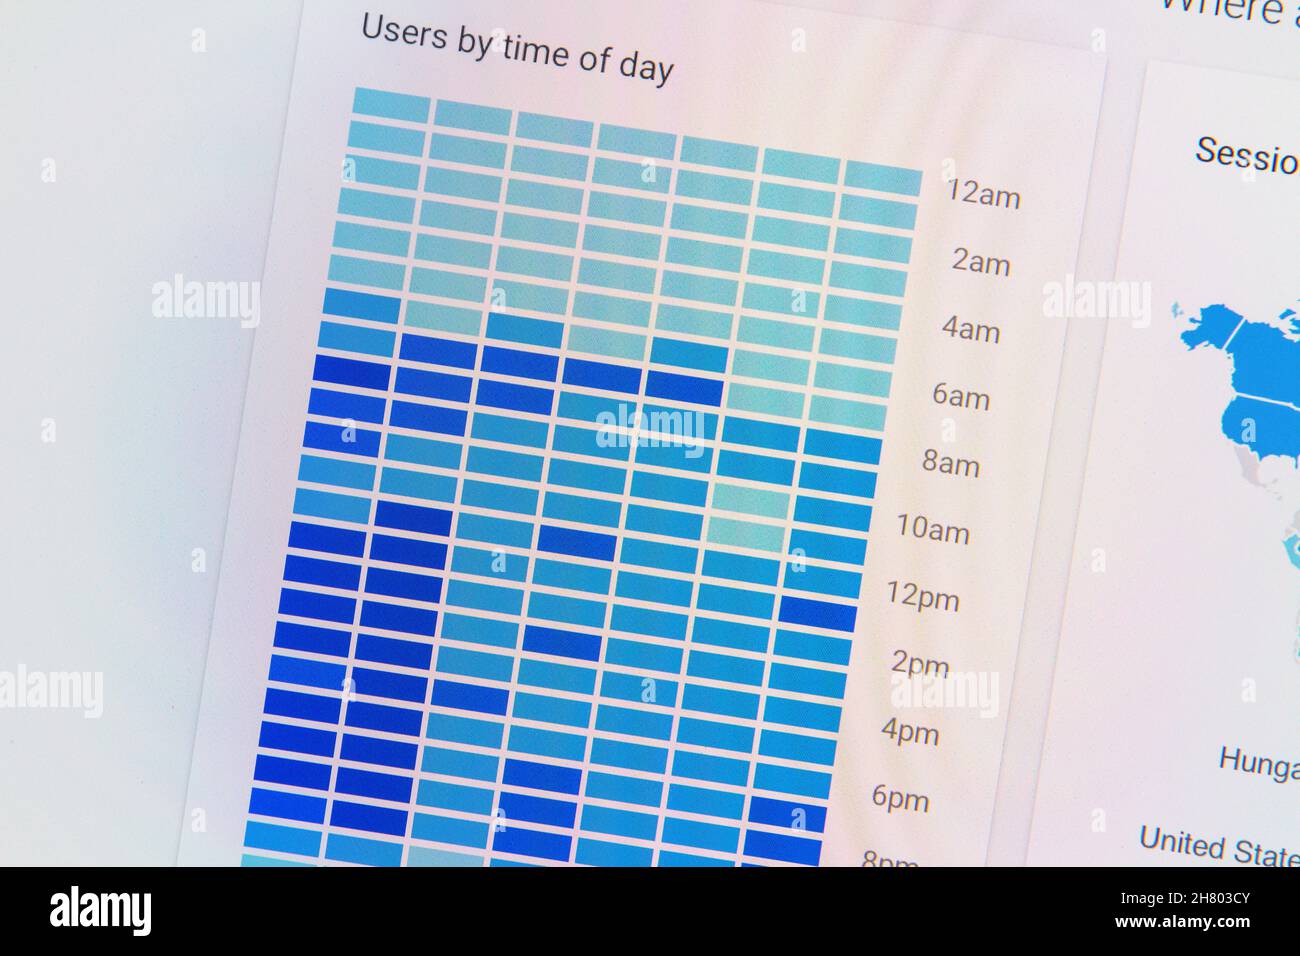 Google Analytics Home page with Users by time of day chart Stock Photo